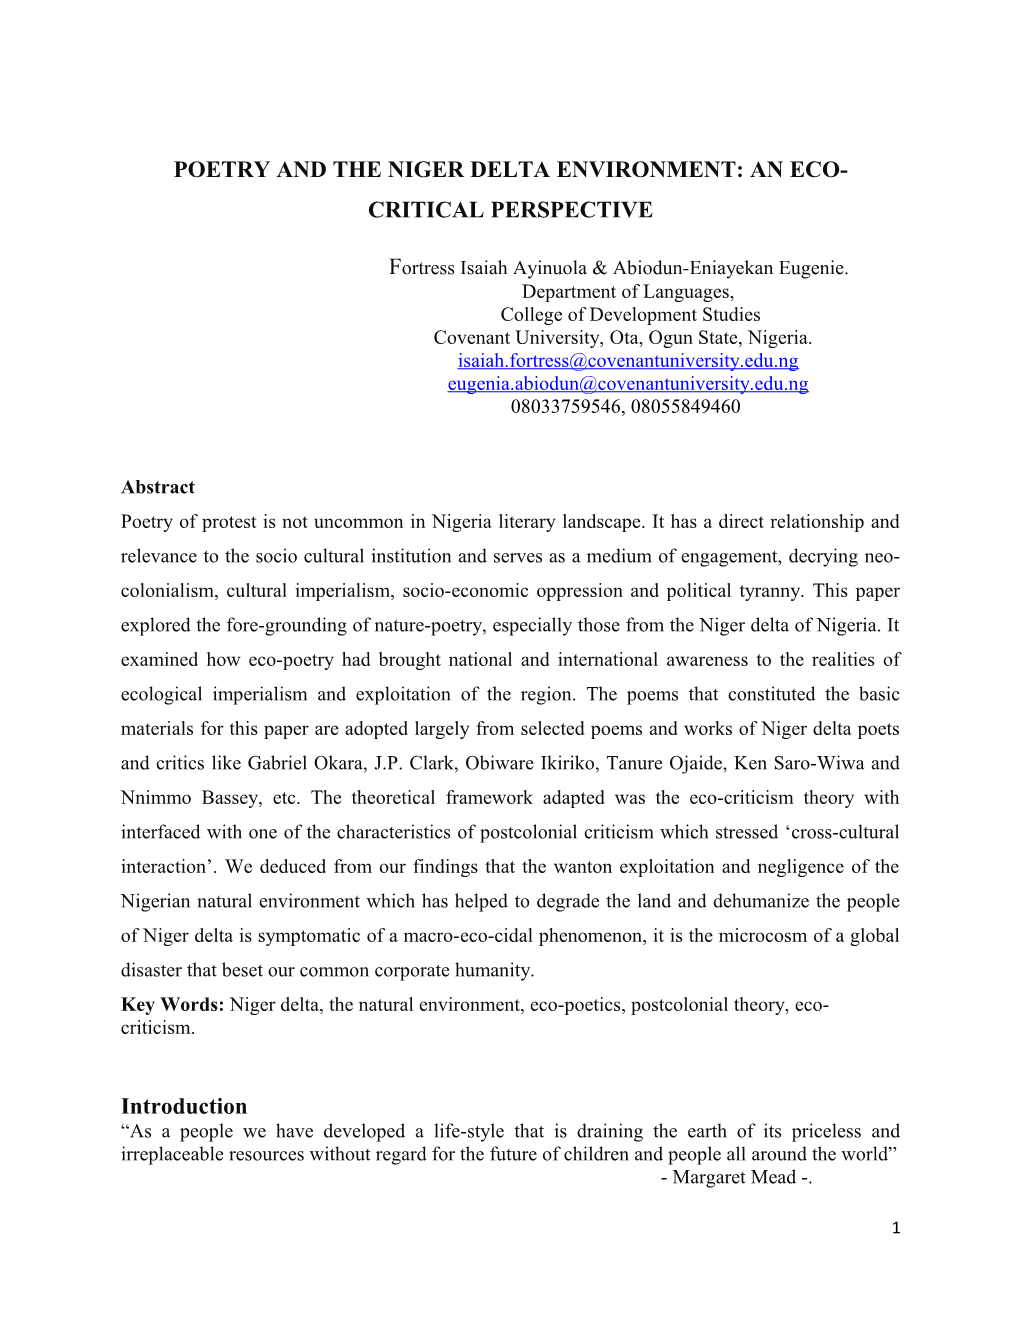 Poetry and the Niger Delta Environment: an Eco-Critical Perspective